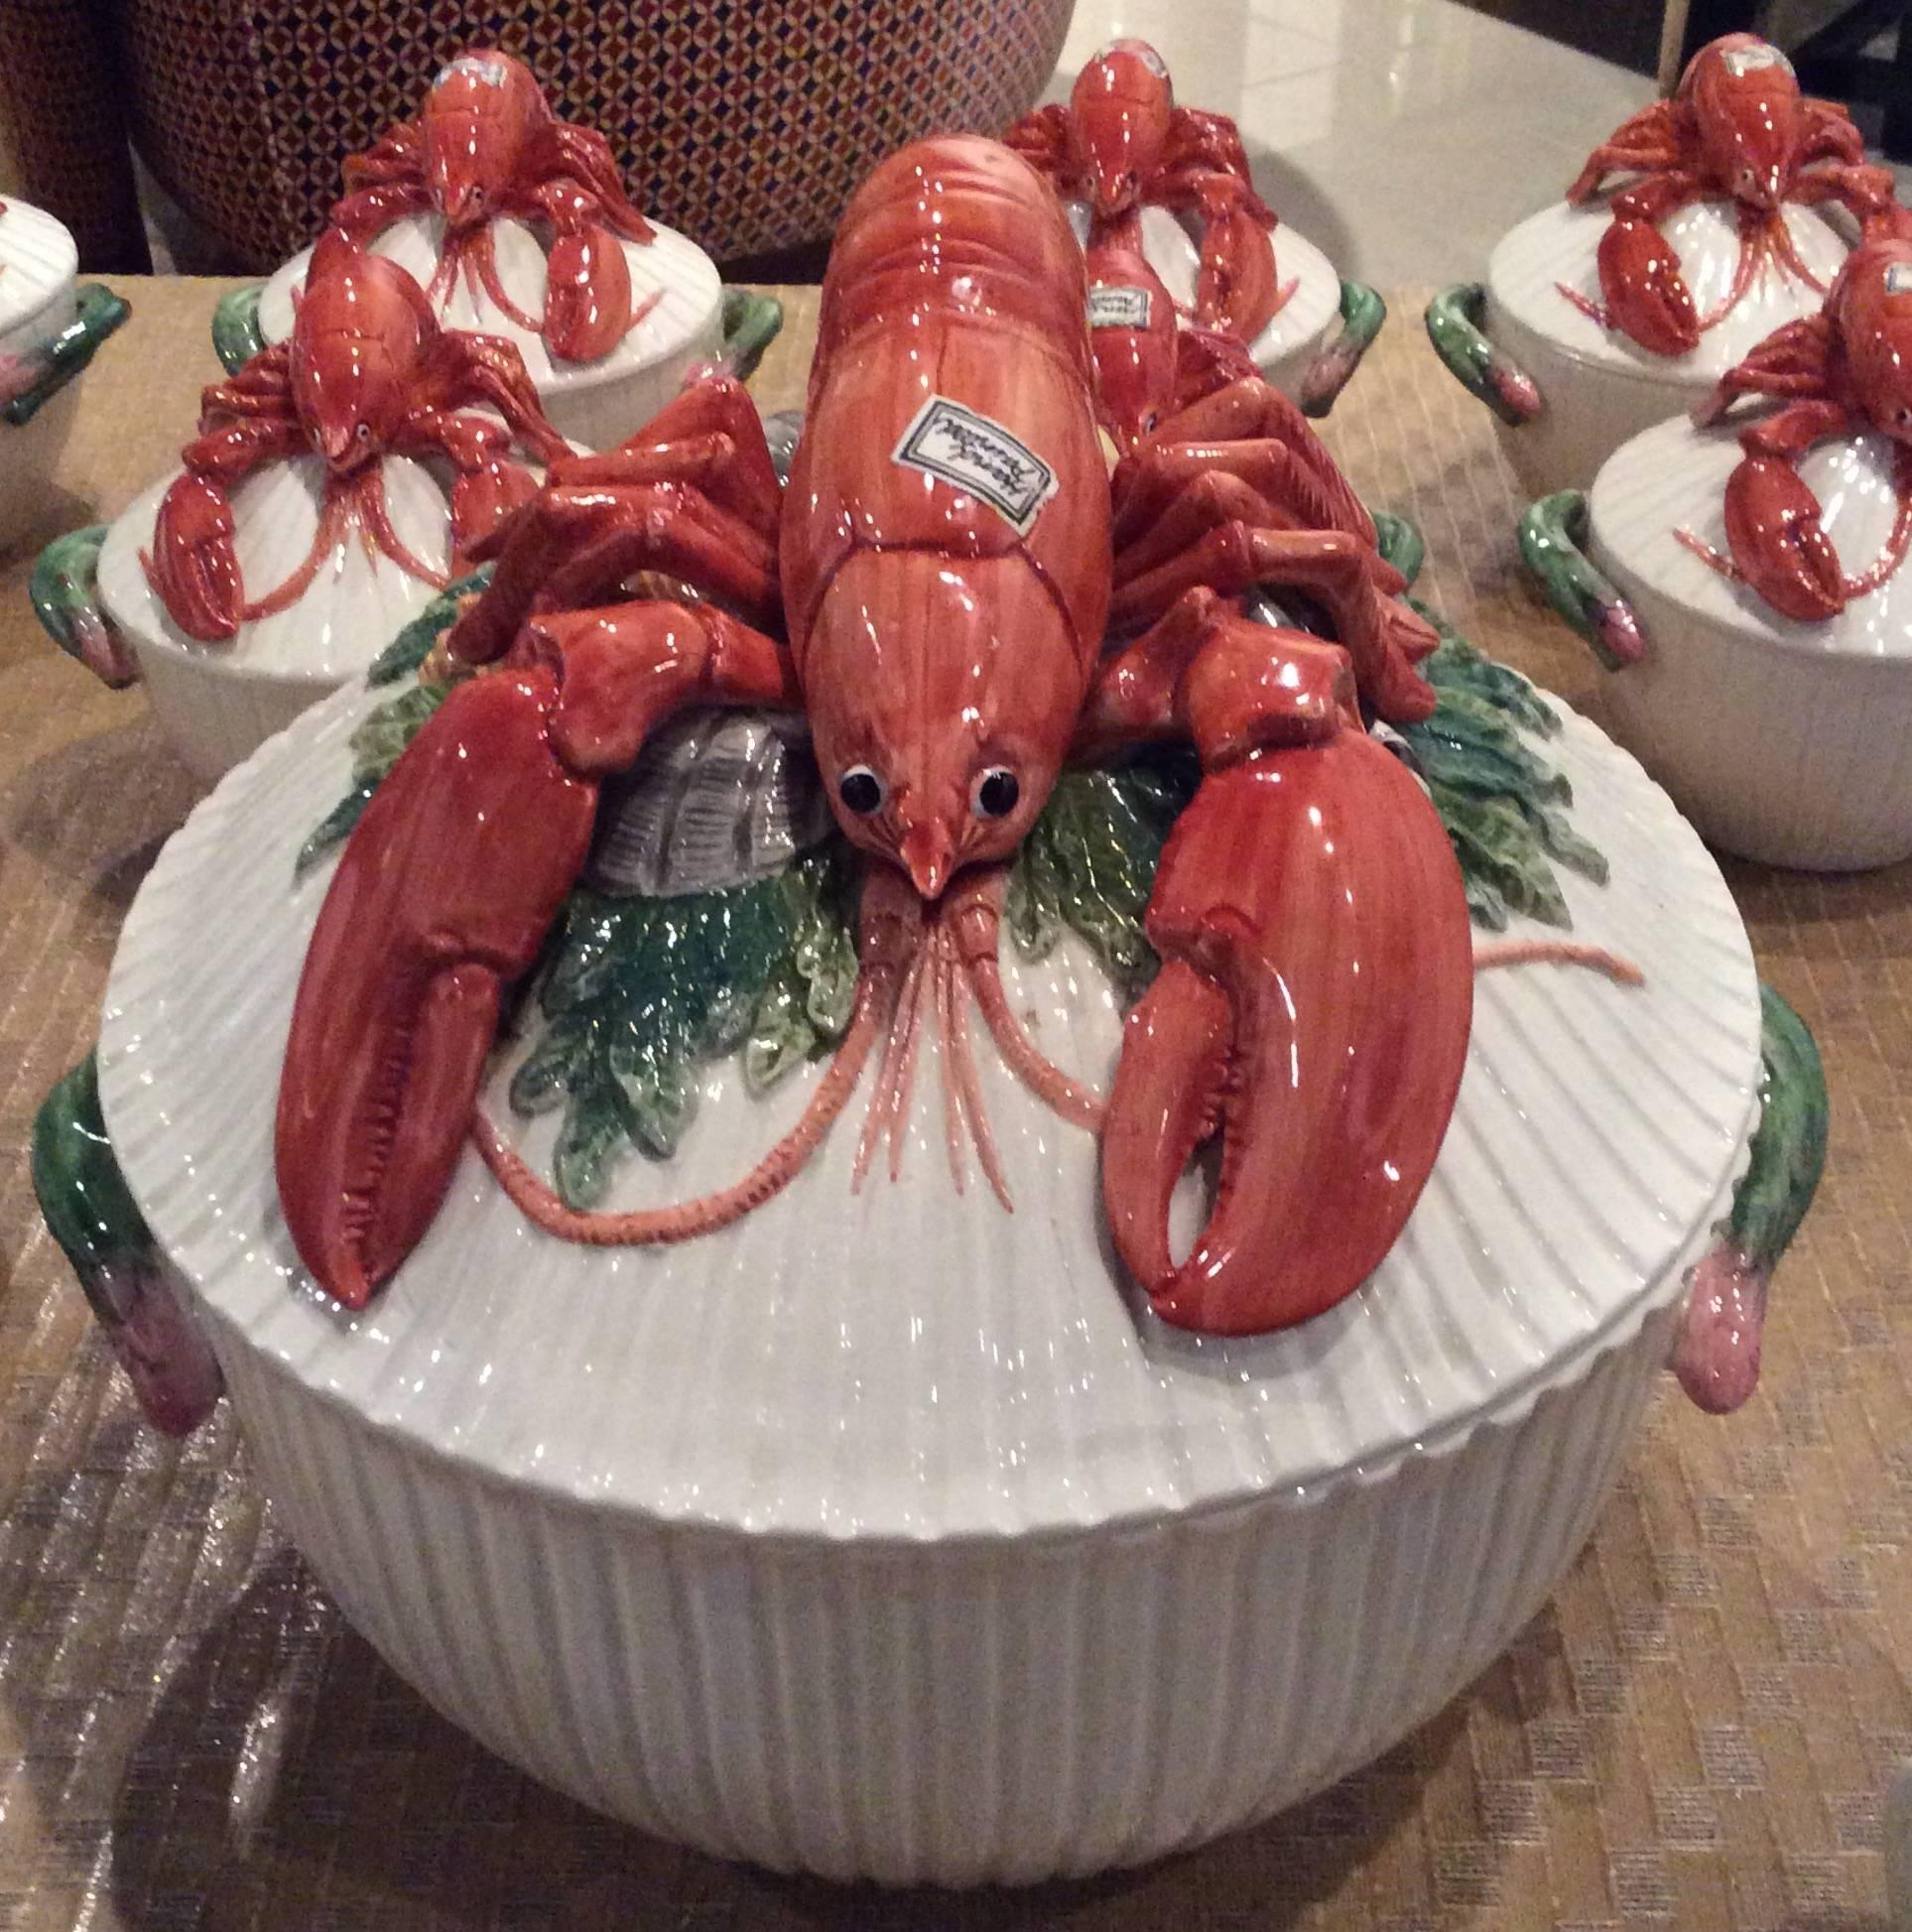 The most amazing vintage Fitz & Floyd lobster serving set, 11 pieces. All original labels are still present on each piece, all pieces are marked FF (Fitz and Floyd), all original boxes are included. This set was never used. Set includes oversized